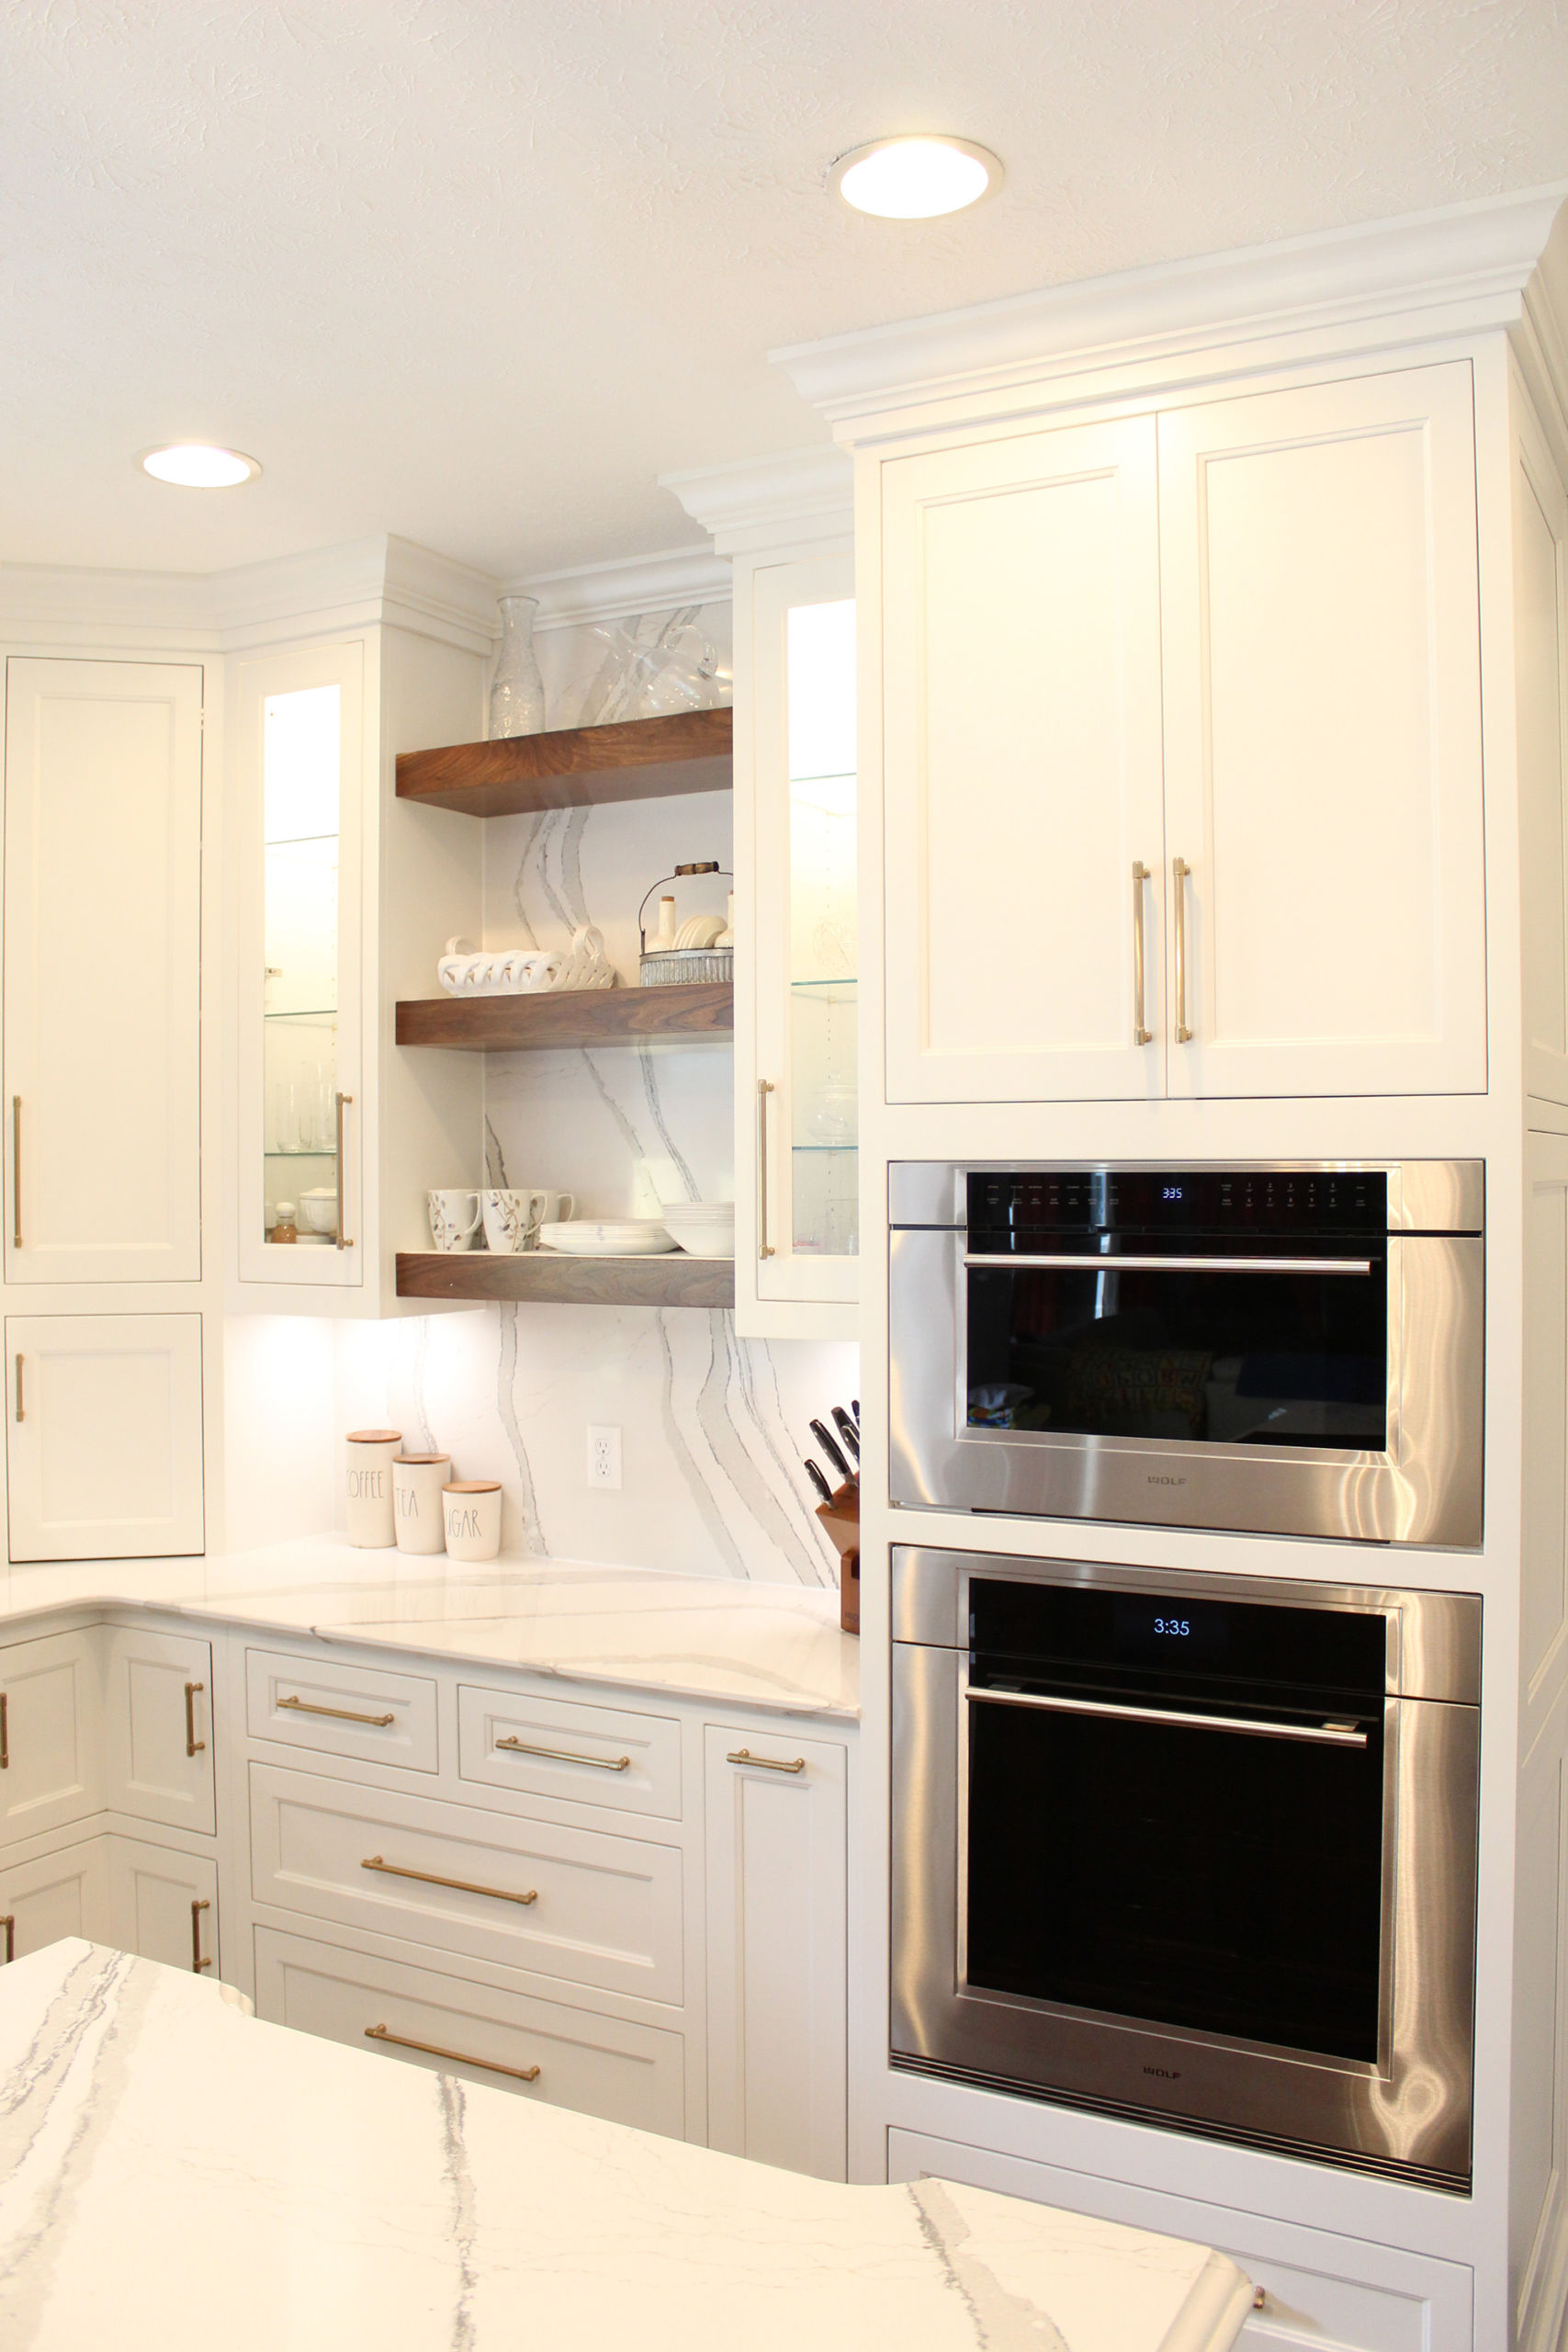 kitchen remodel built by a home renovation design company in Chagrin Falls, Ohio